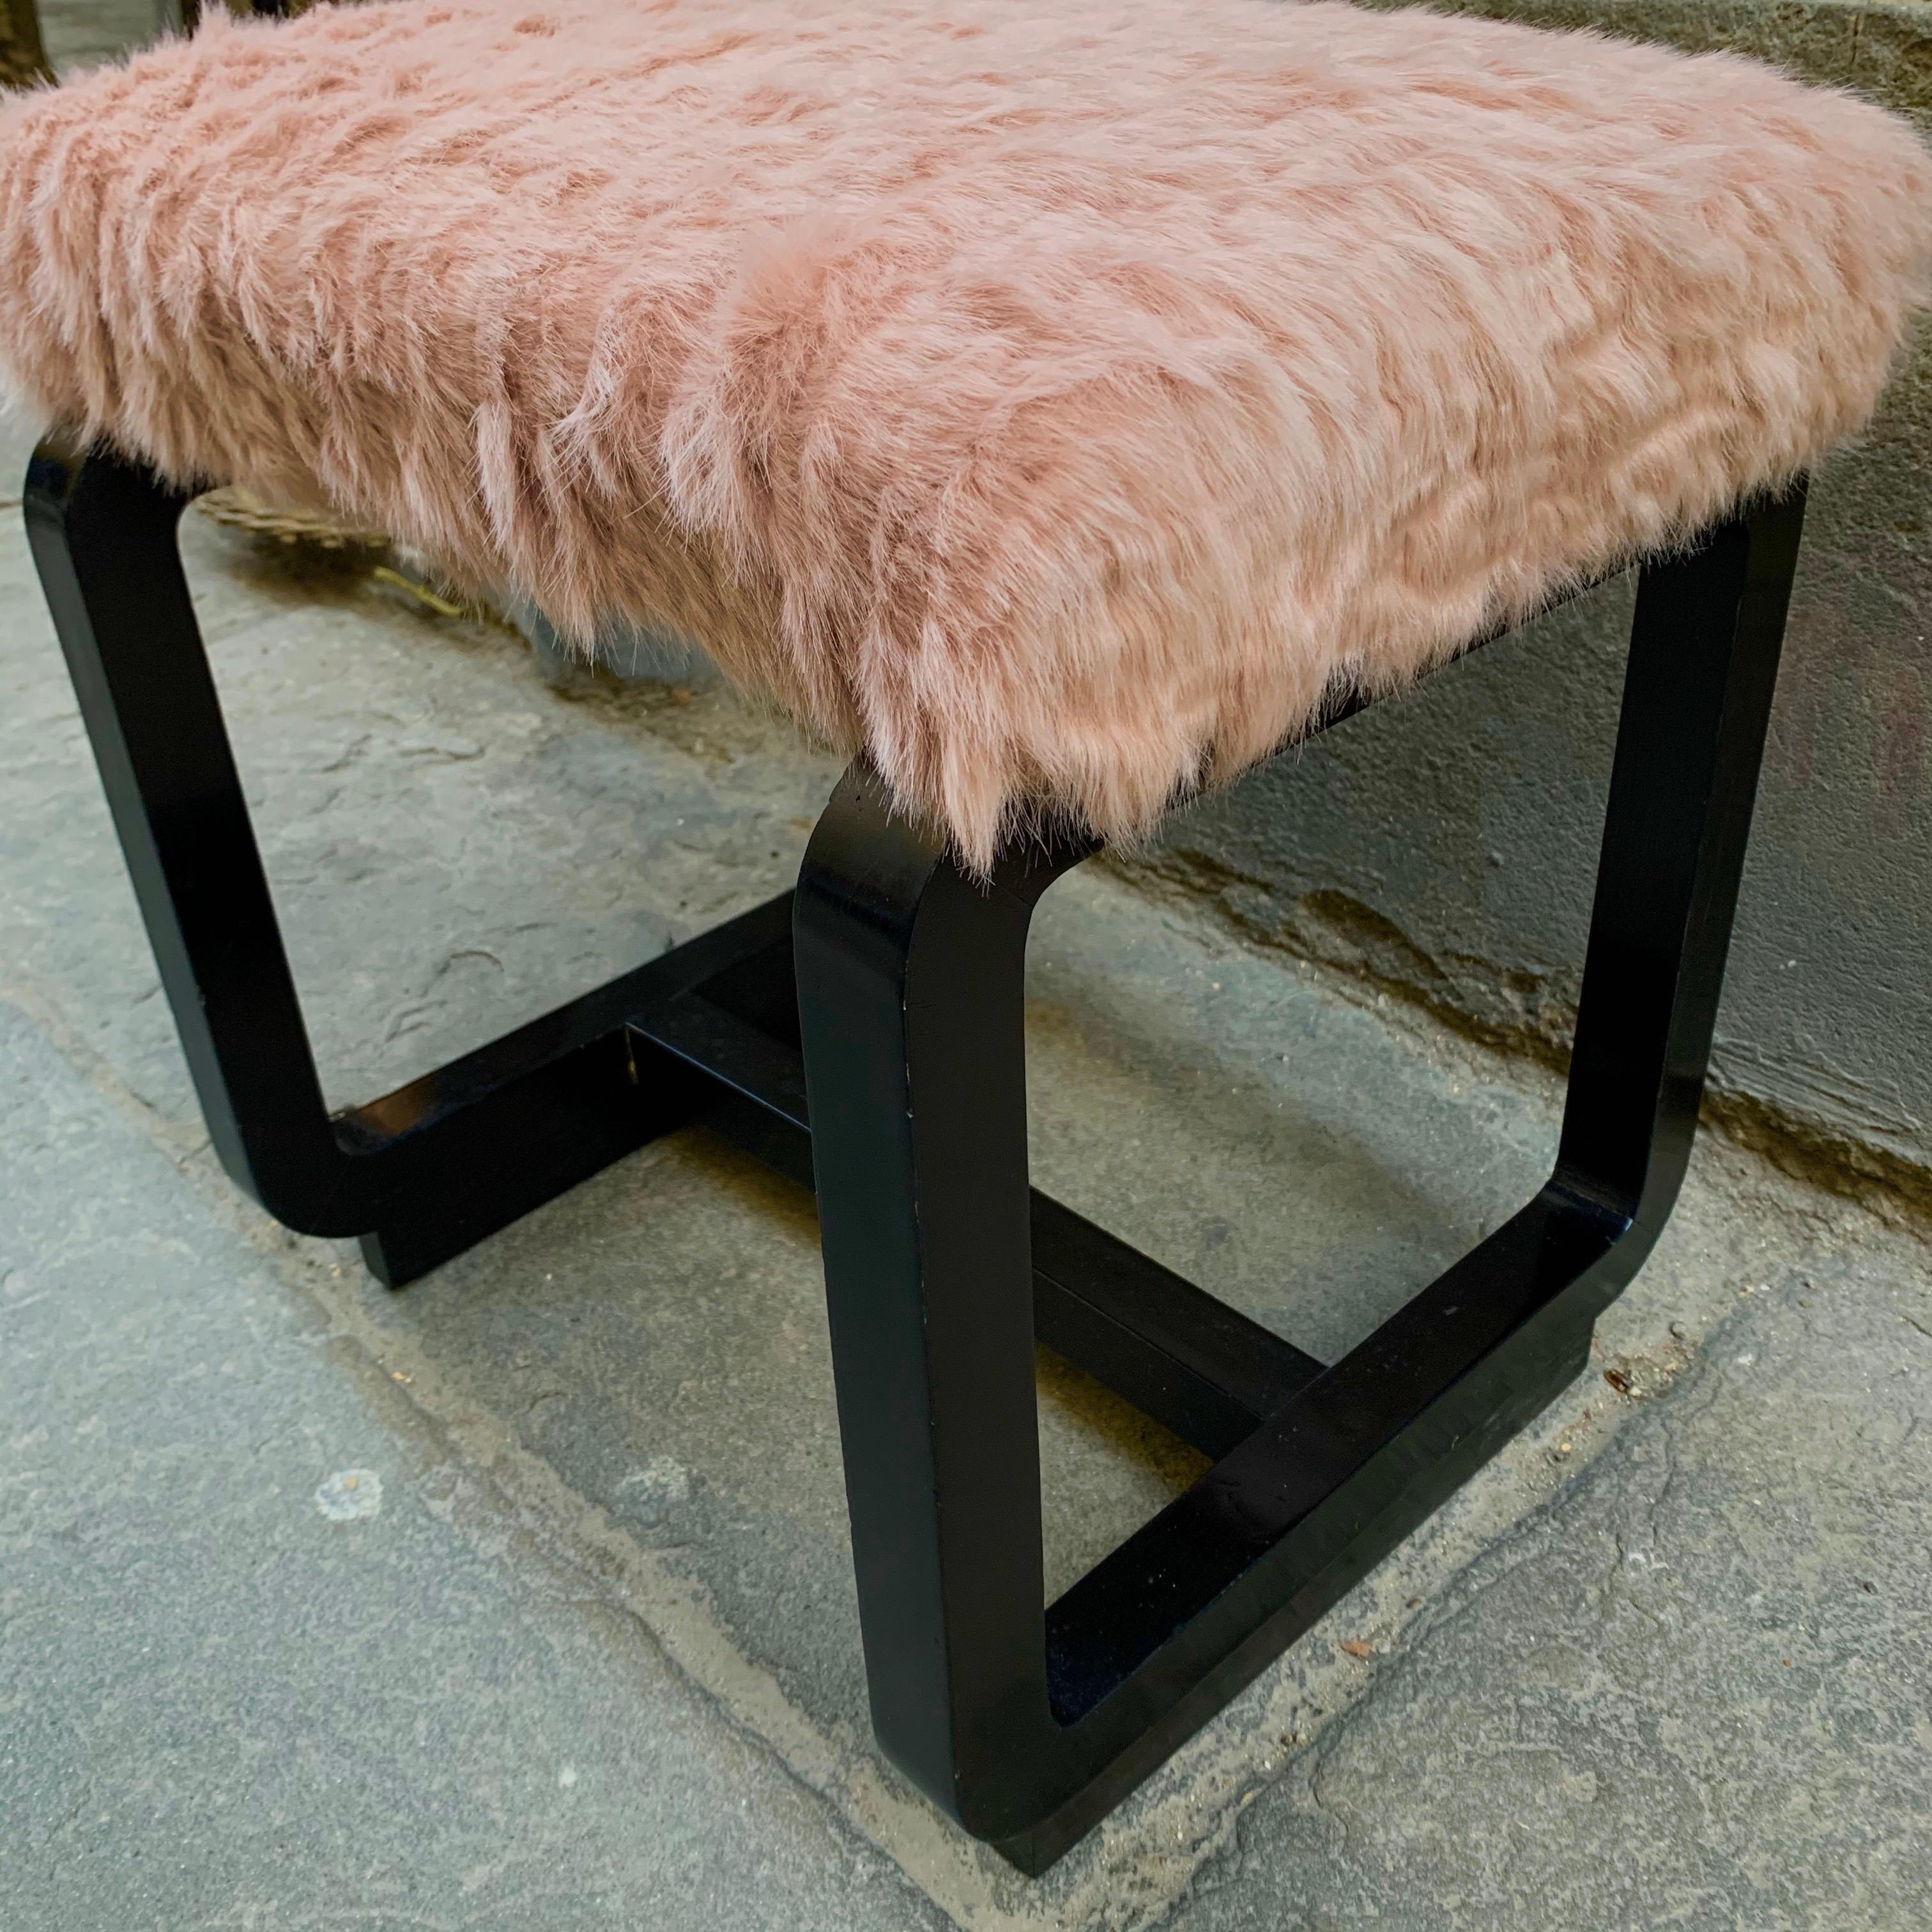 Pair of Deco Benches in Black Lacquered Wood and Pale Pink Eco Fur Seats, 1930 4